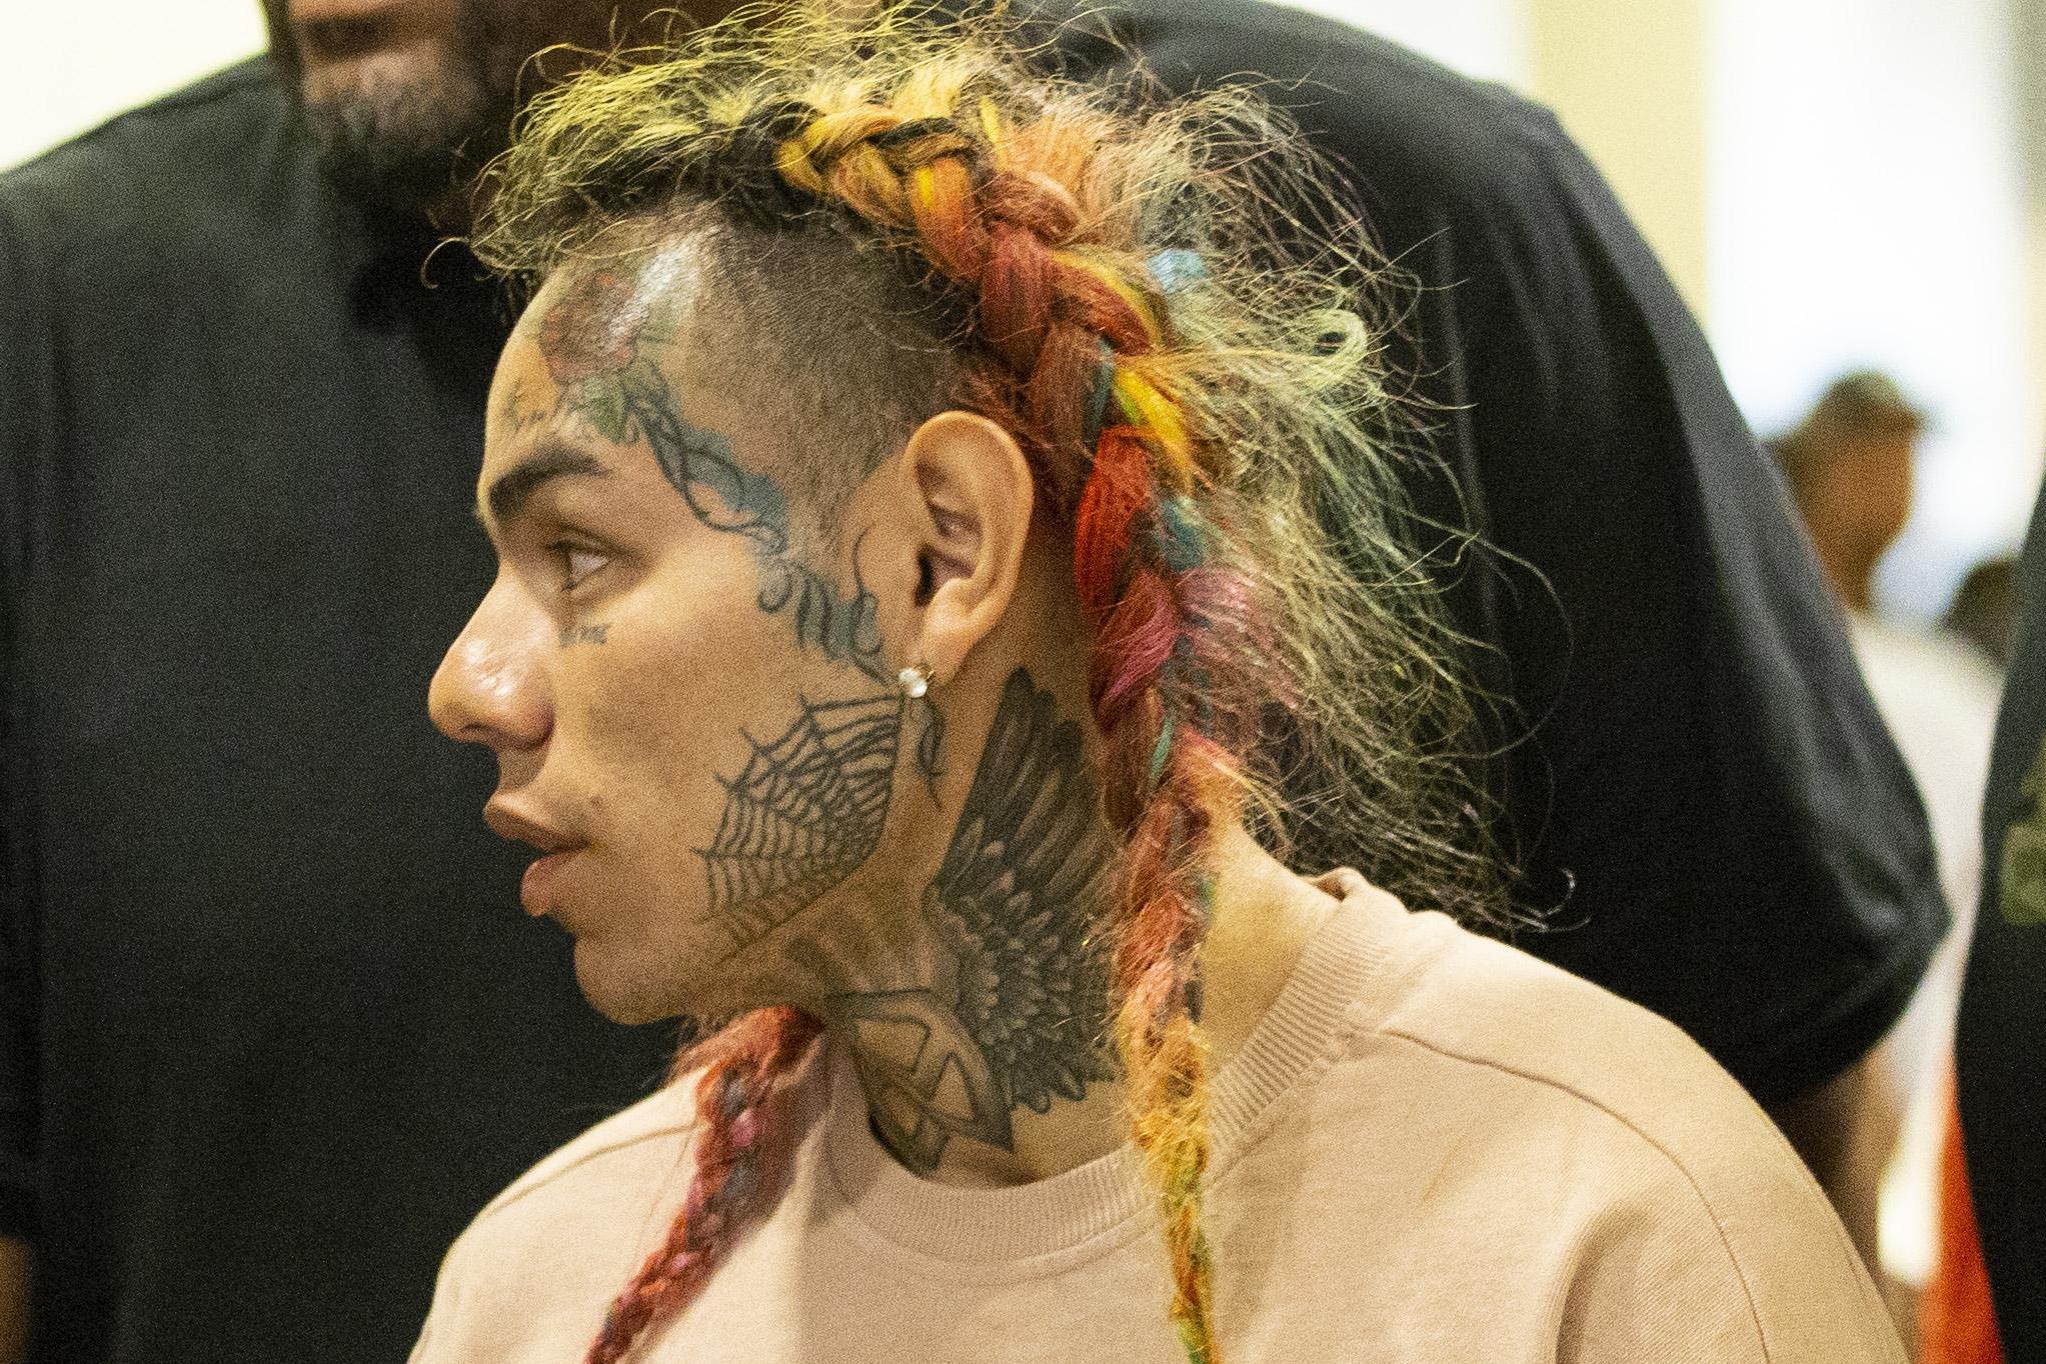 Rapper Tekashi 6ix9ine sentenced to two years in prison after testifying against gang